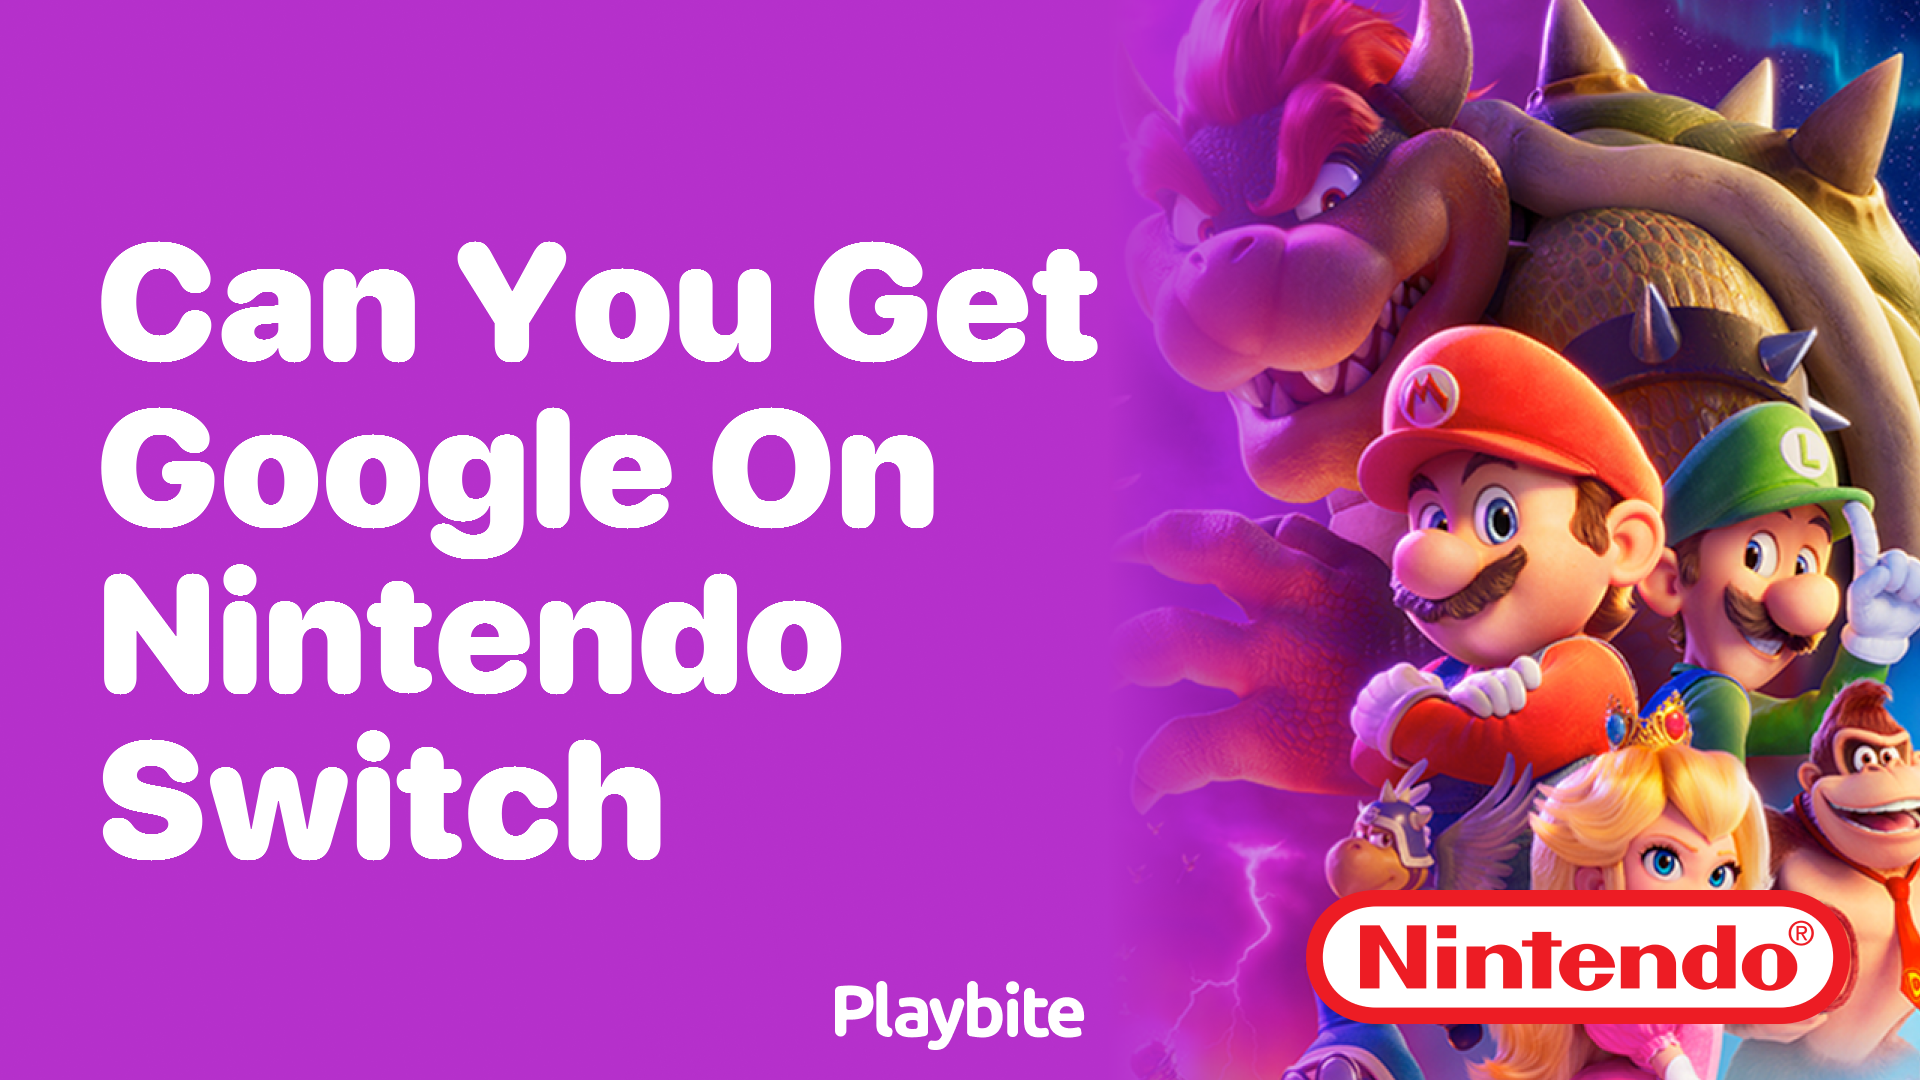 Can You Get Google on Nintendo Switch?